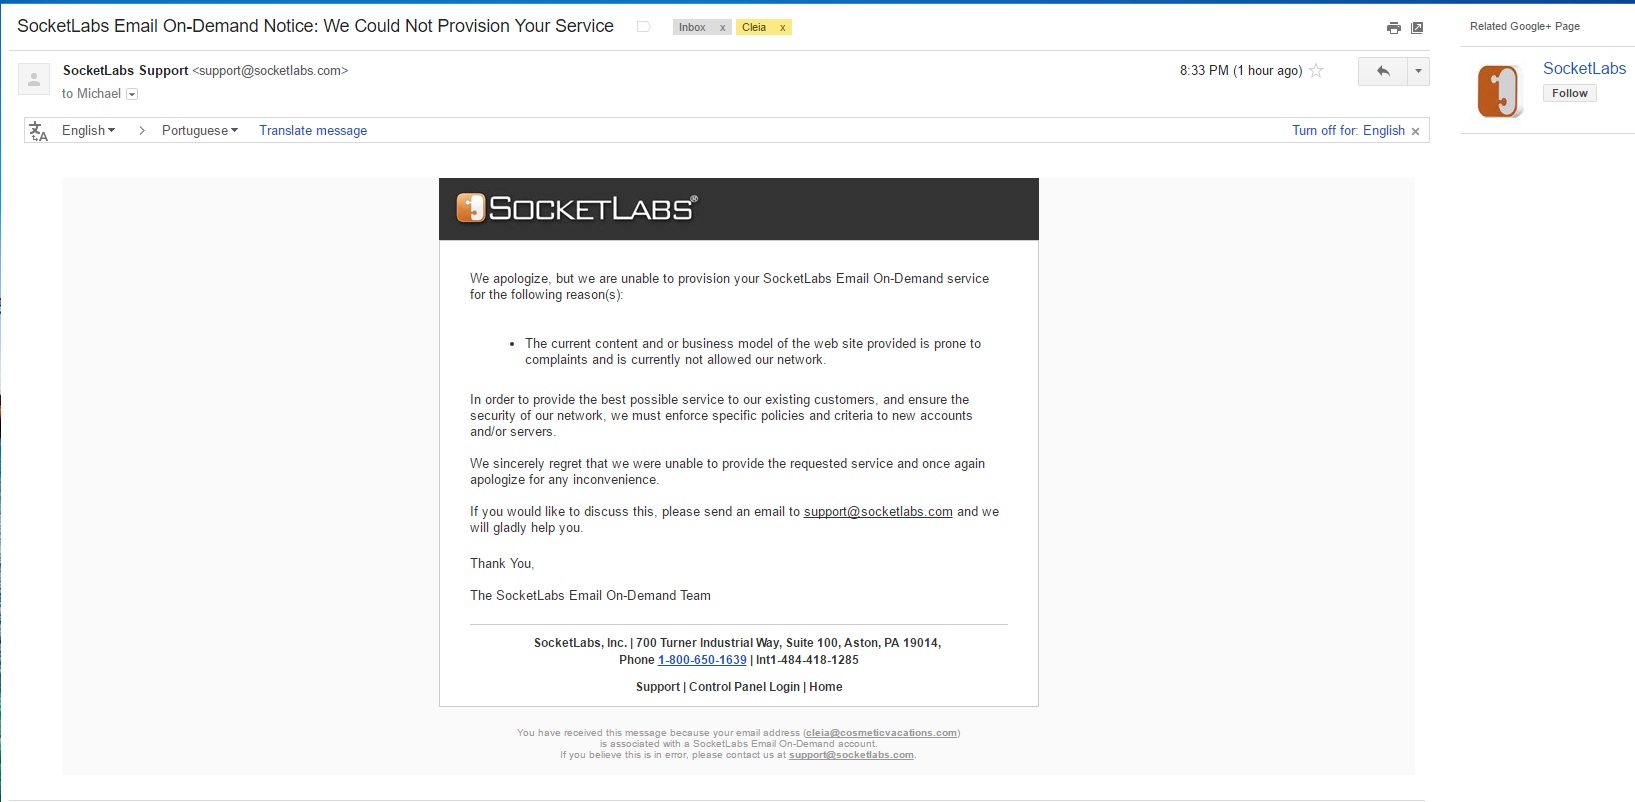 Email received from Socketlab